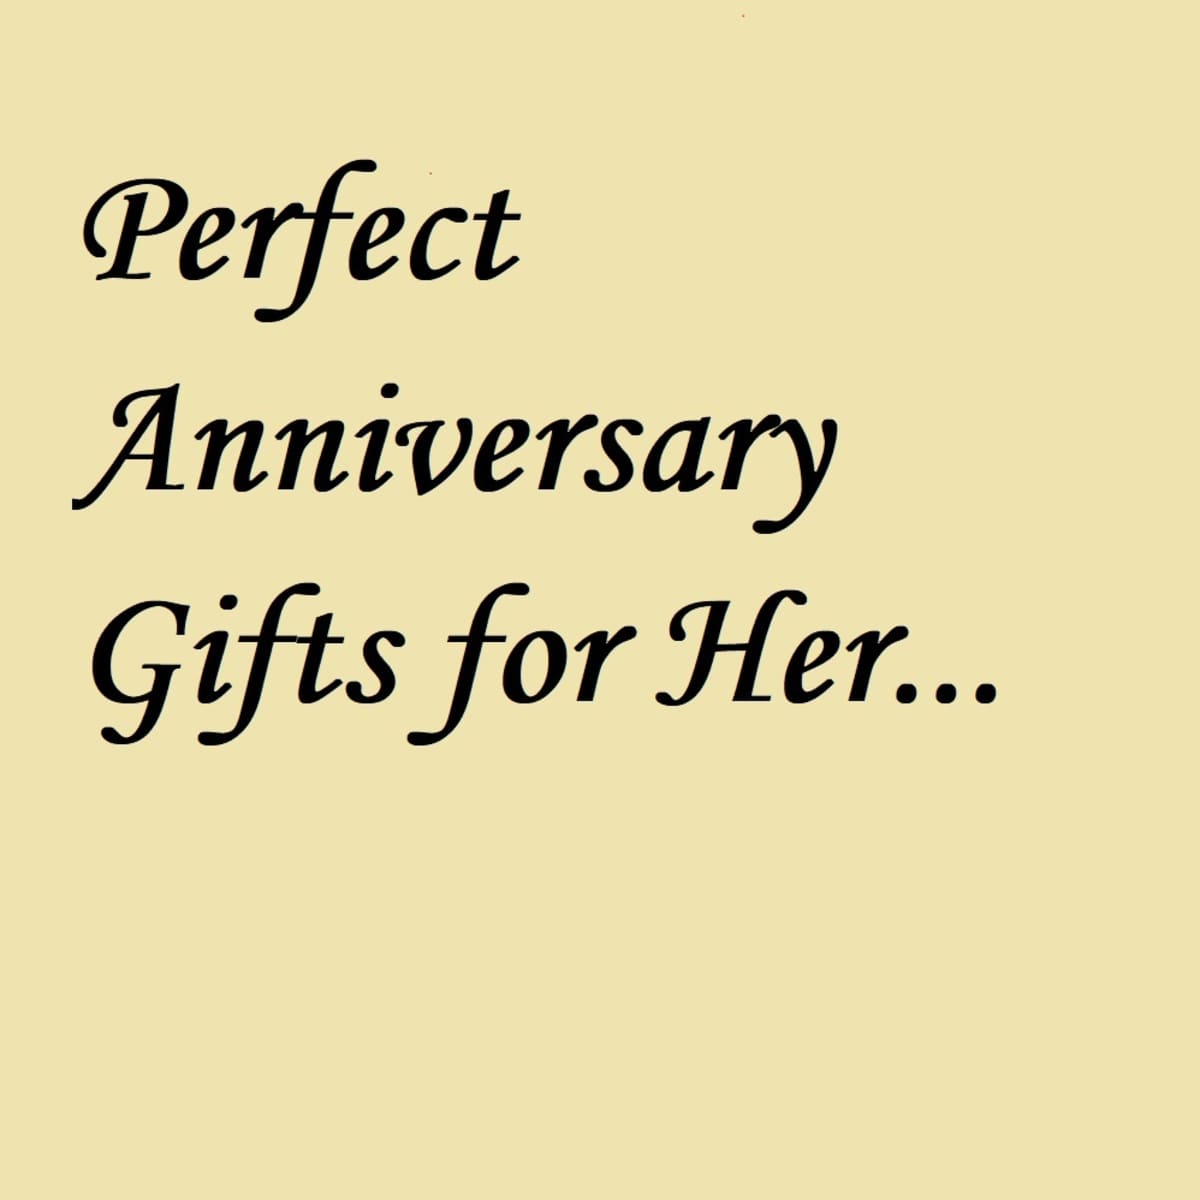 Perfect Anniversary Gifts for Her - HubPages